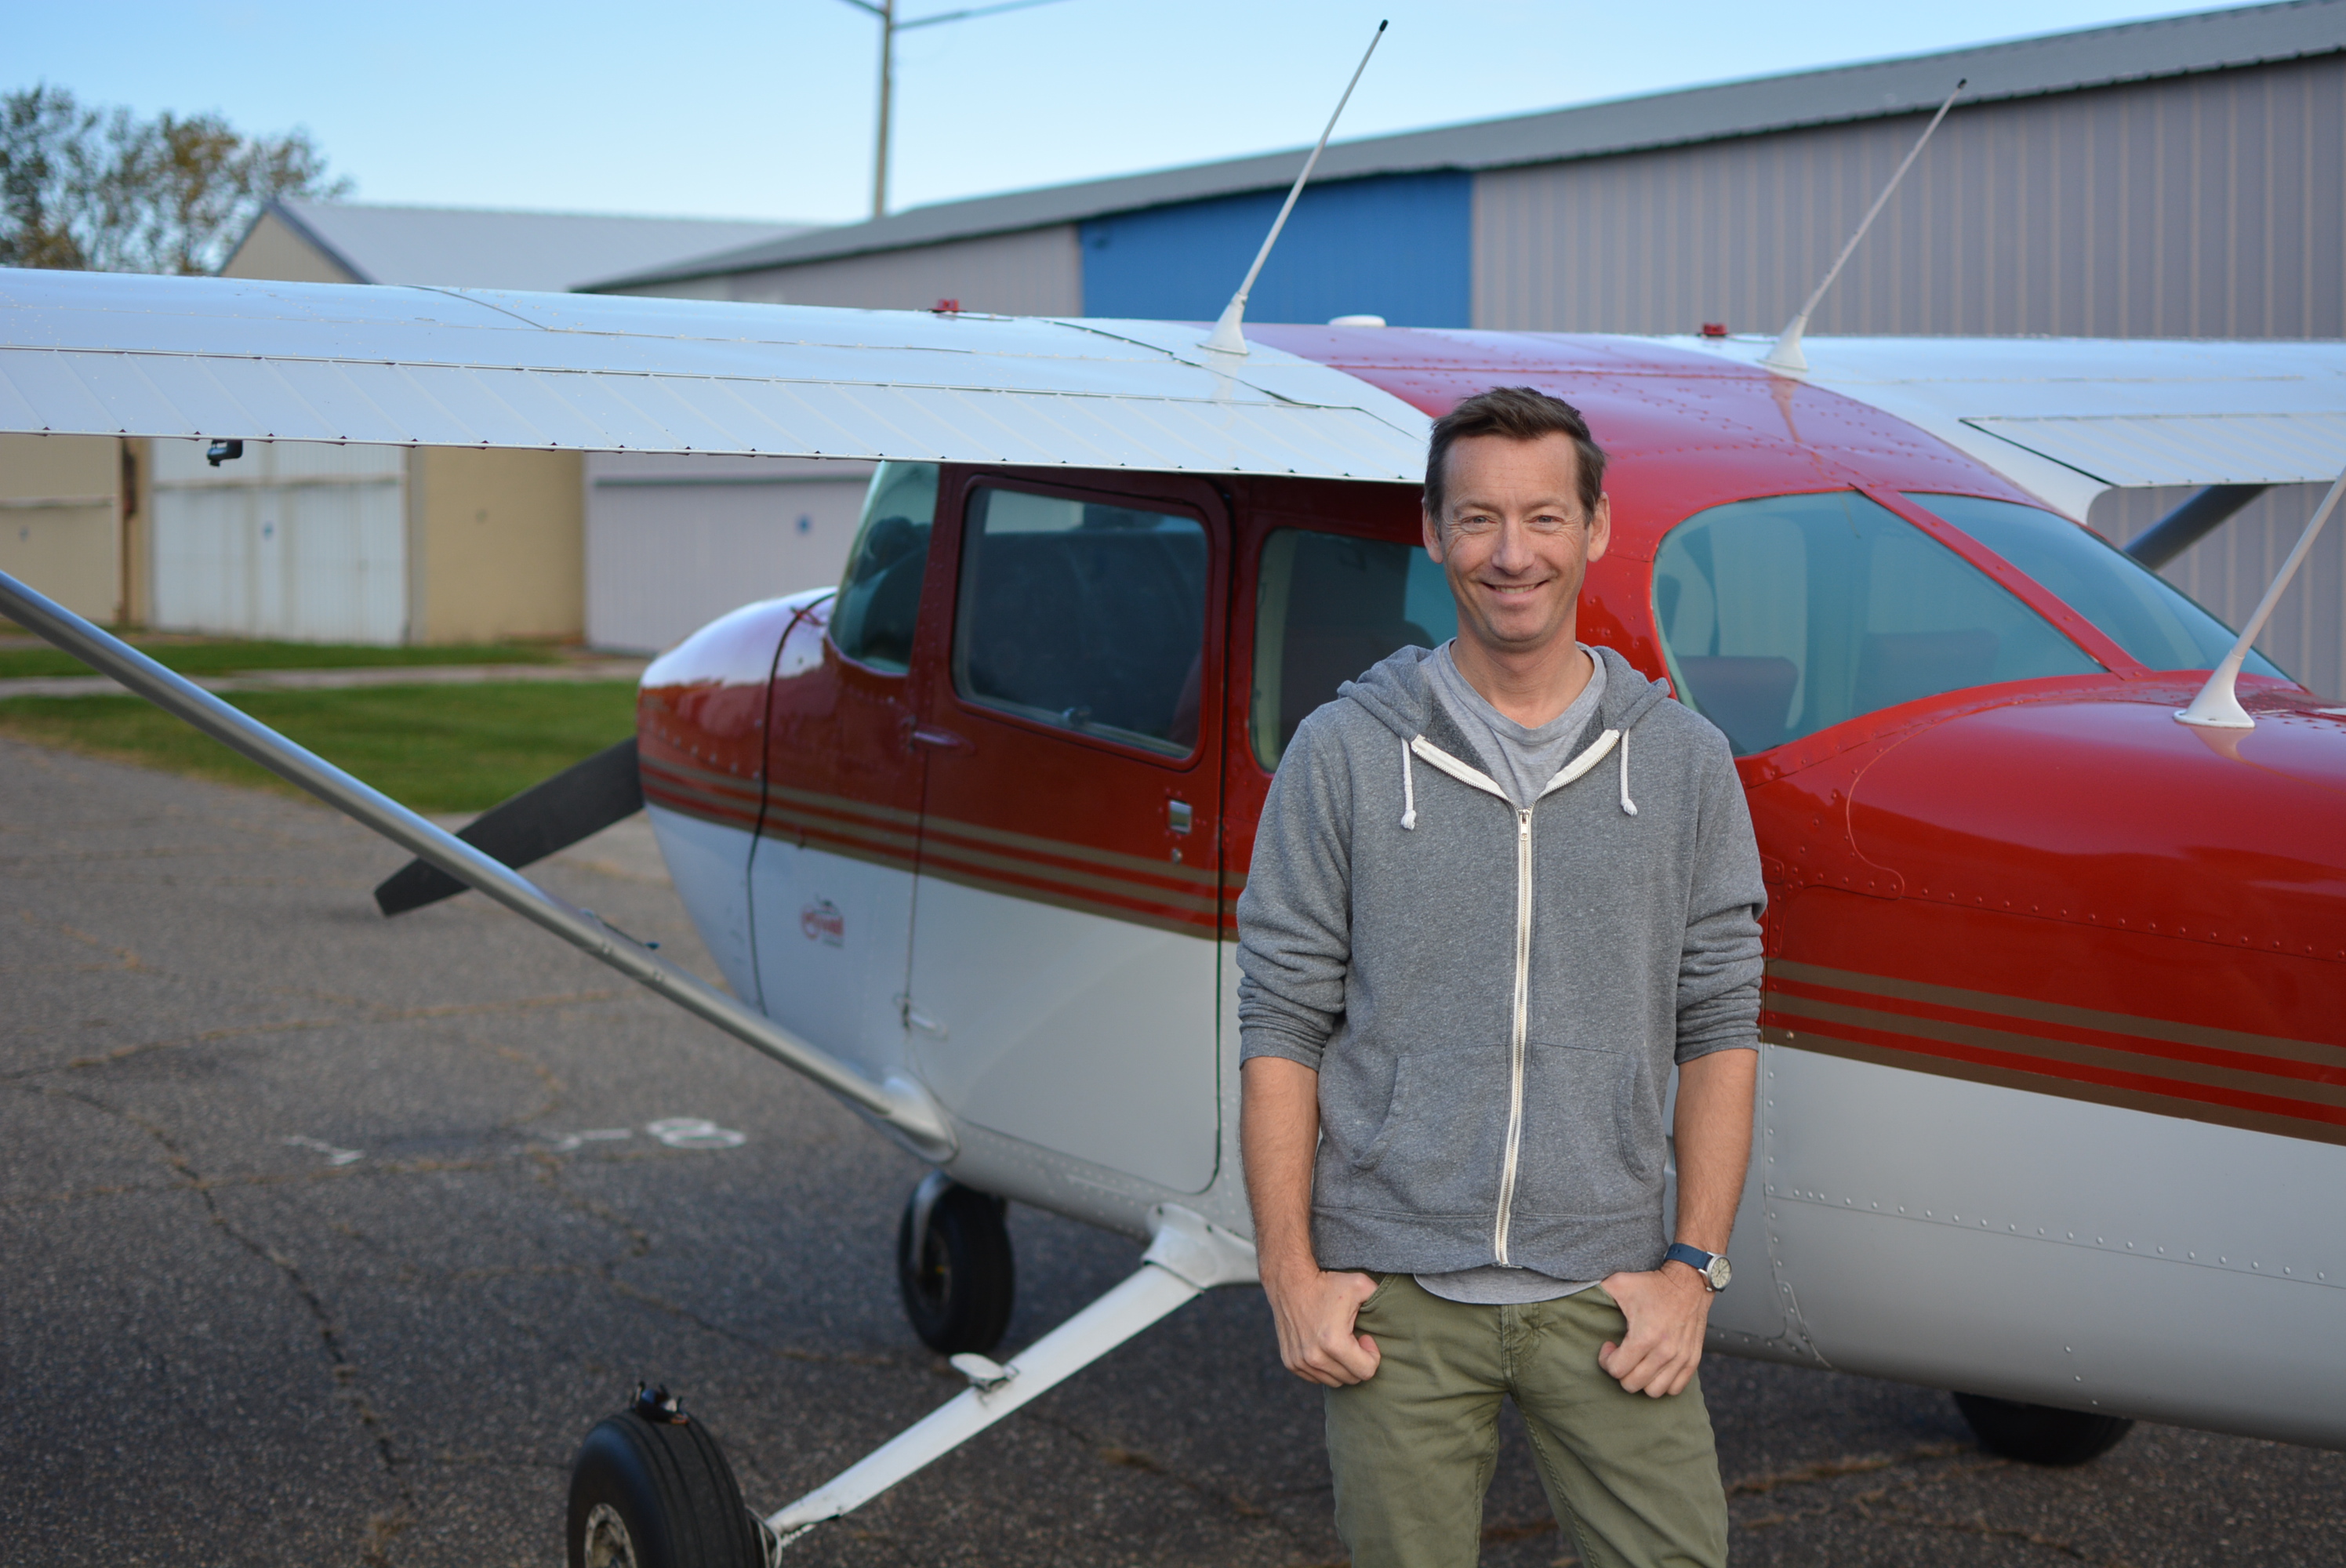 Congrats to JJ on his first solo!